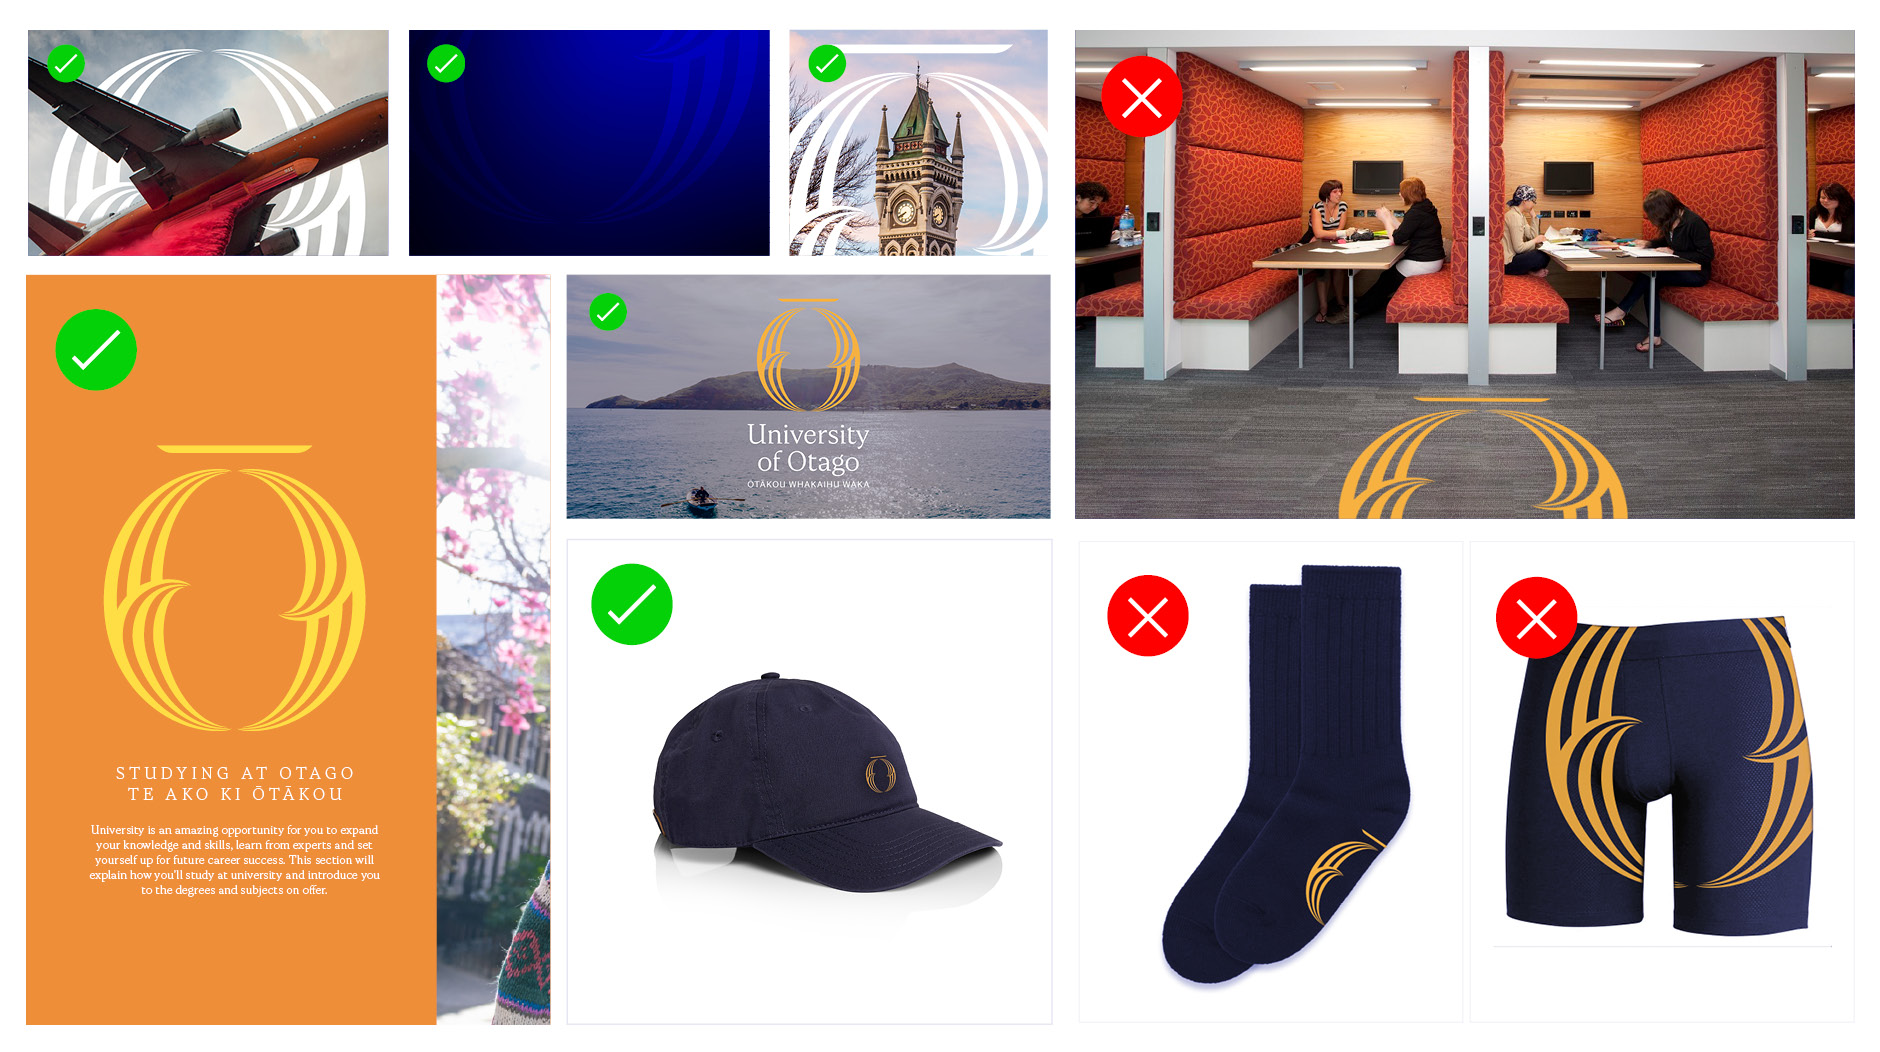 Examples of the University of Otago tohu being used correctly (on digital and print marketing materials, and on a hat) and incorrectly (on carpet, on the sole of socks, on a pair of undershorts).